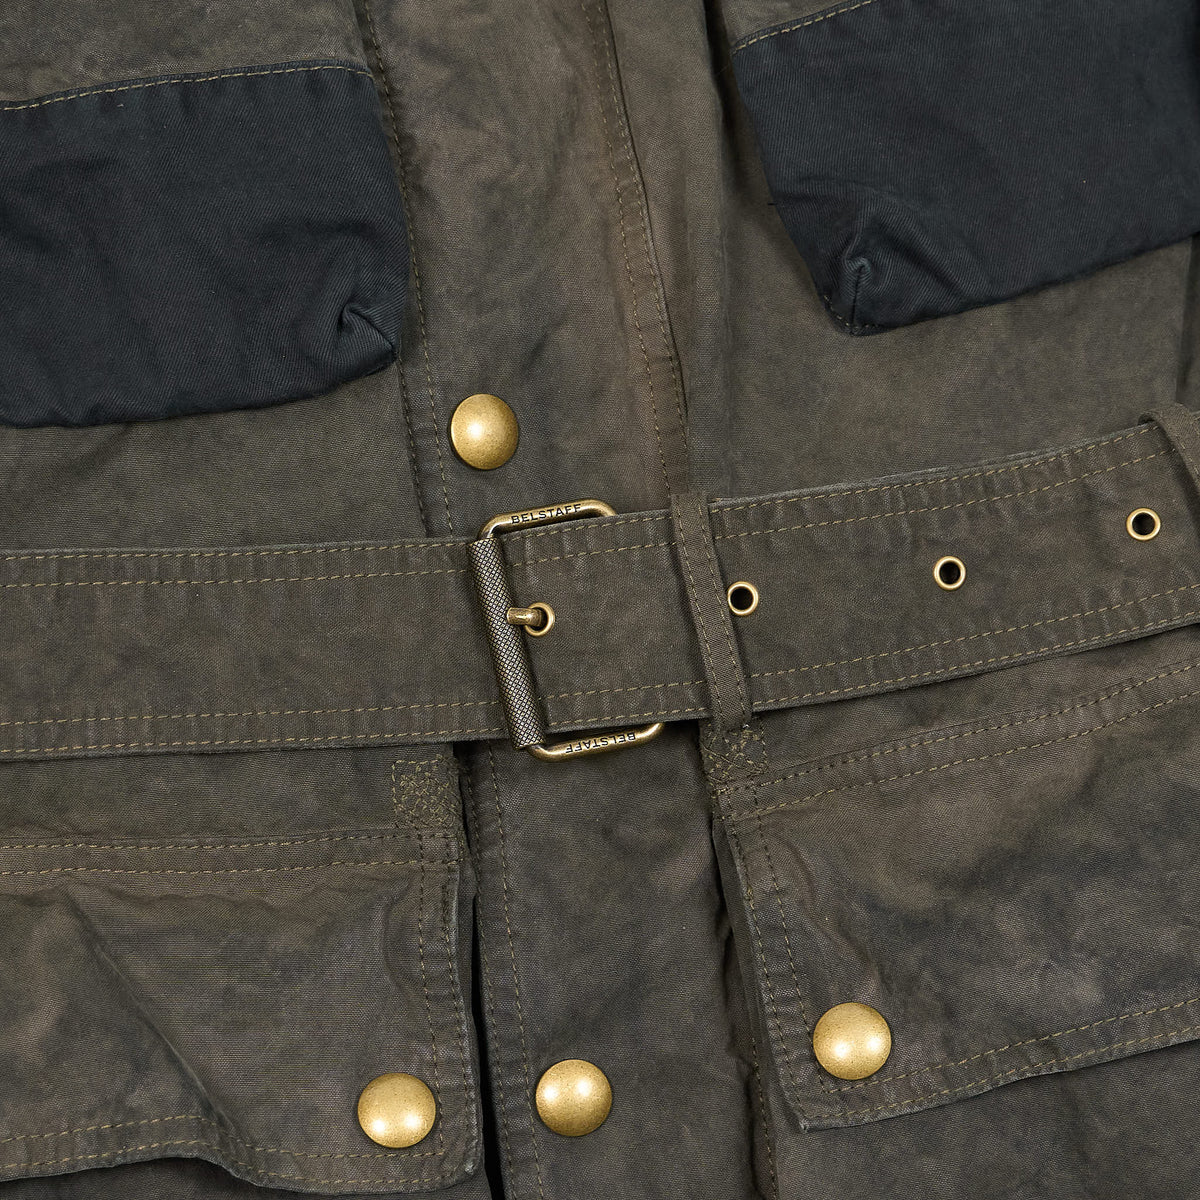 Belstaff Patched Dry Waxed Trialmaster